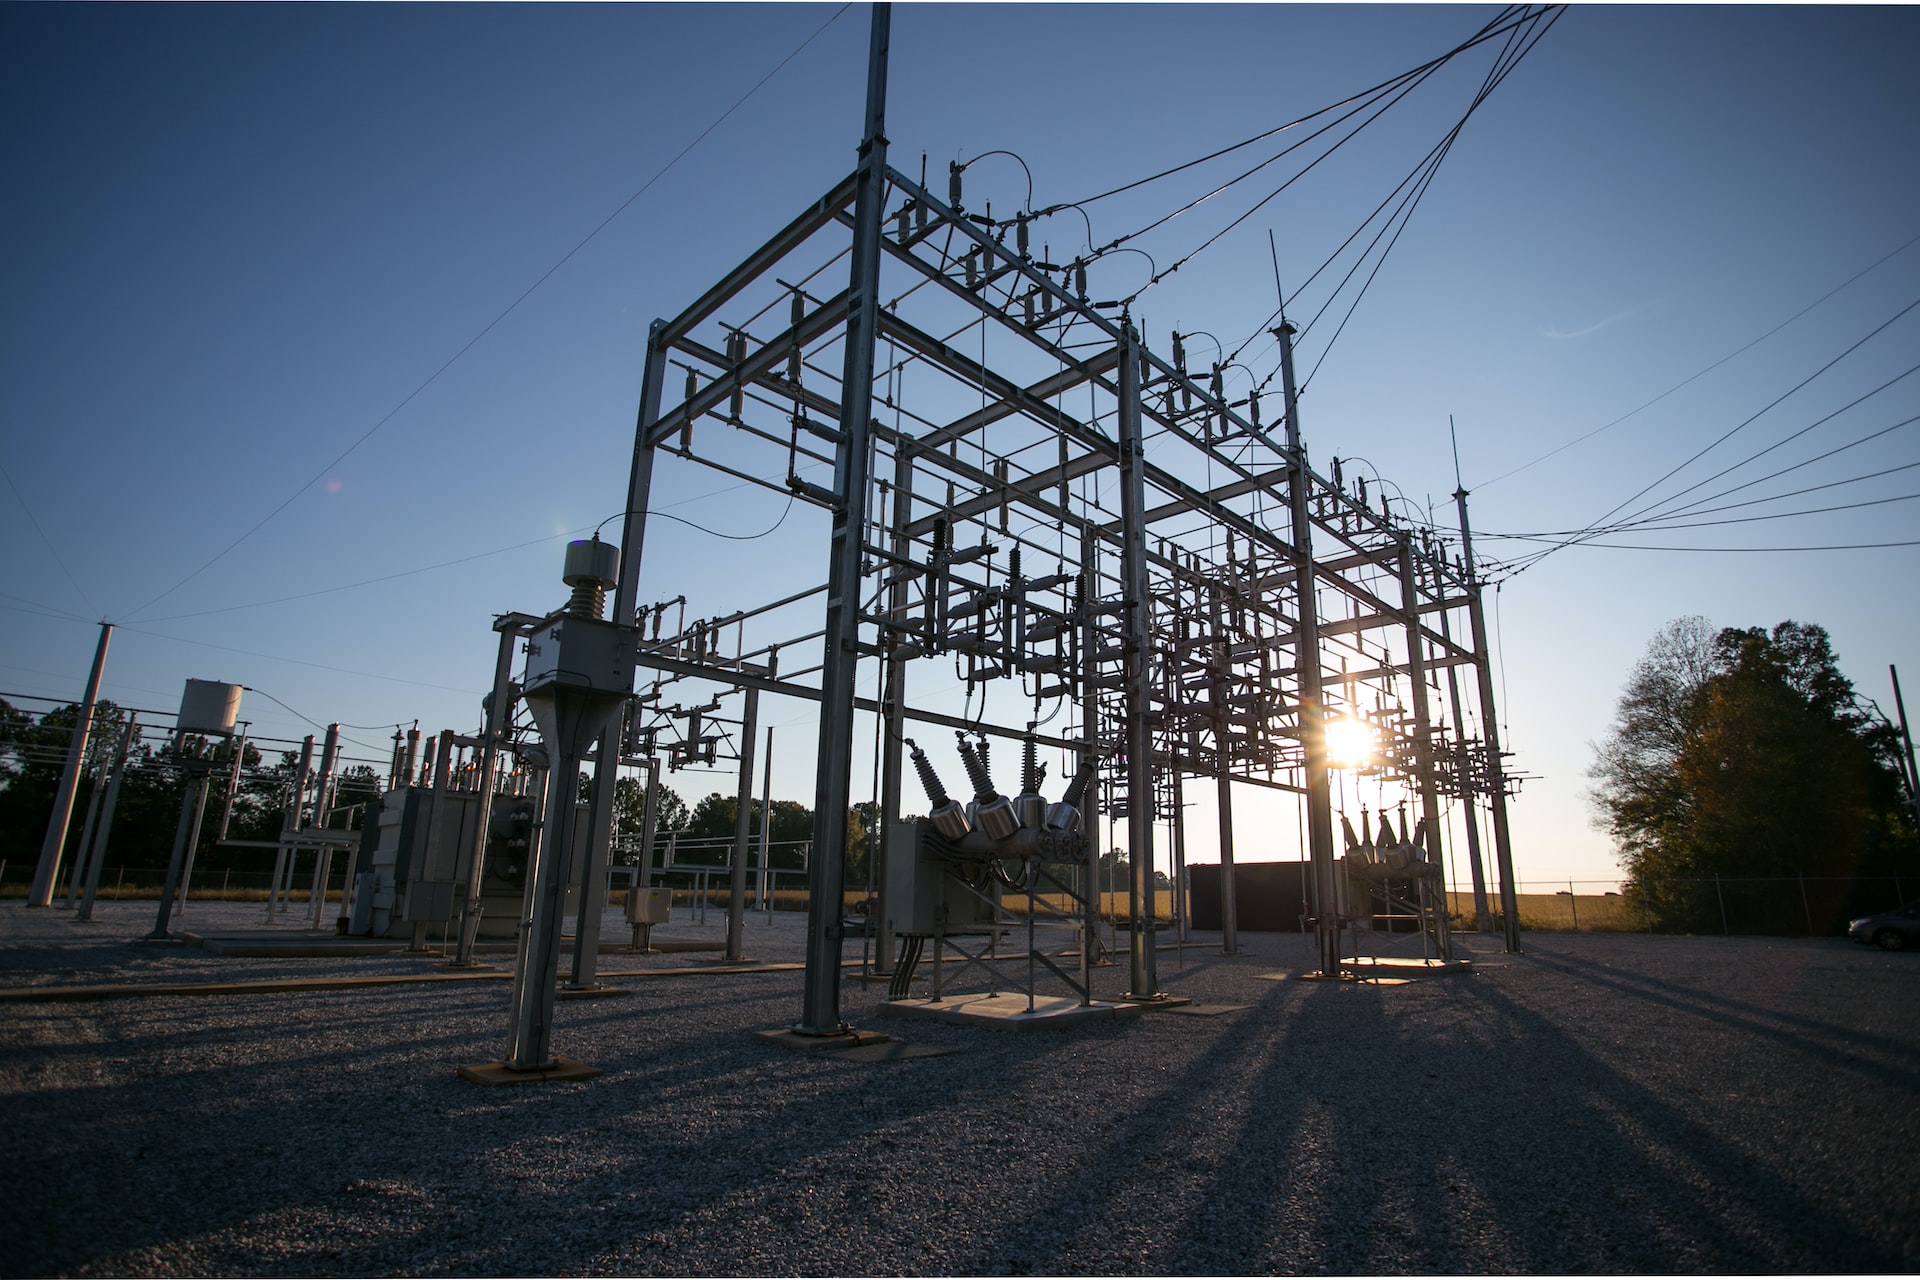 Image of electrical substation equipment